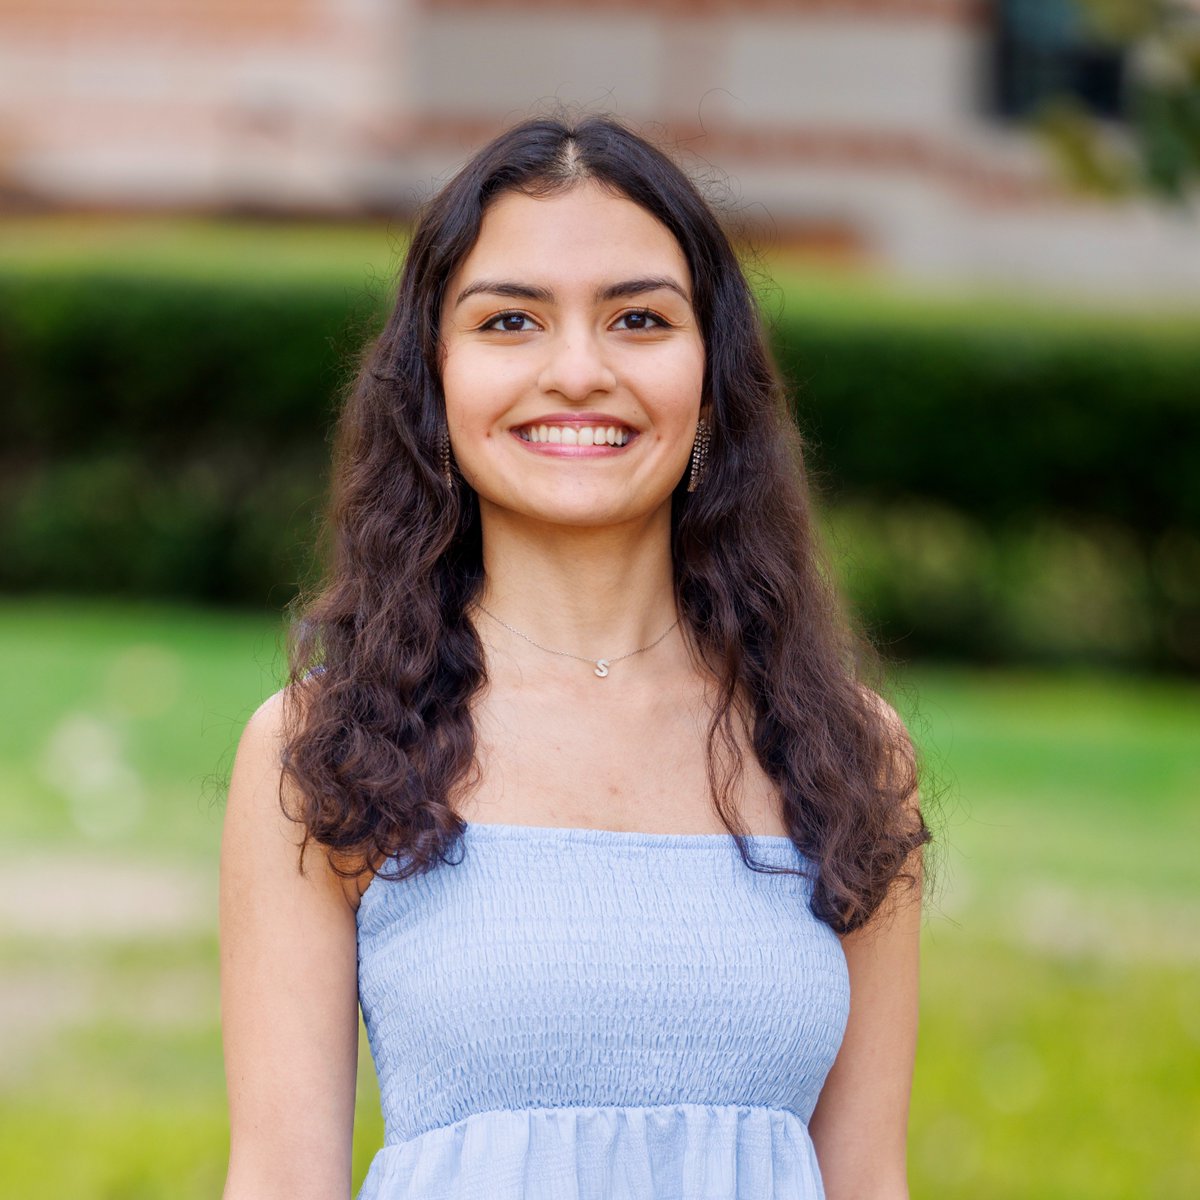 It is our honor to congratulate Shivani Kulkarni, who is graduating with a major in Cognitive Sciences and a minor in GLHT. At Rice, Shivani was a part of Team PIPER and Team CoreNeedle winning multiple awards for her work in global health. Congrats, Shivani!🎓